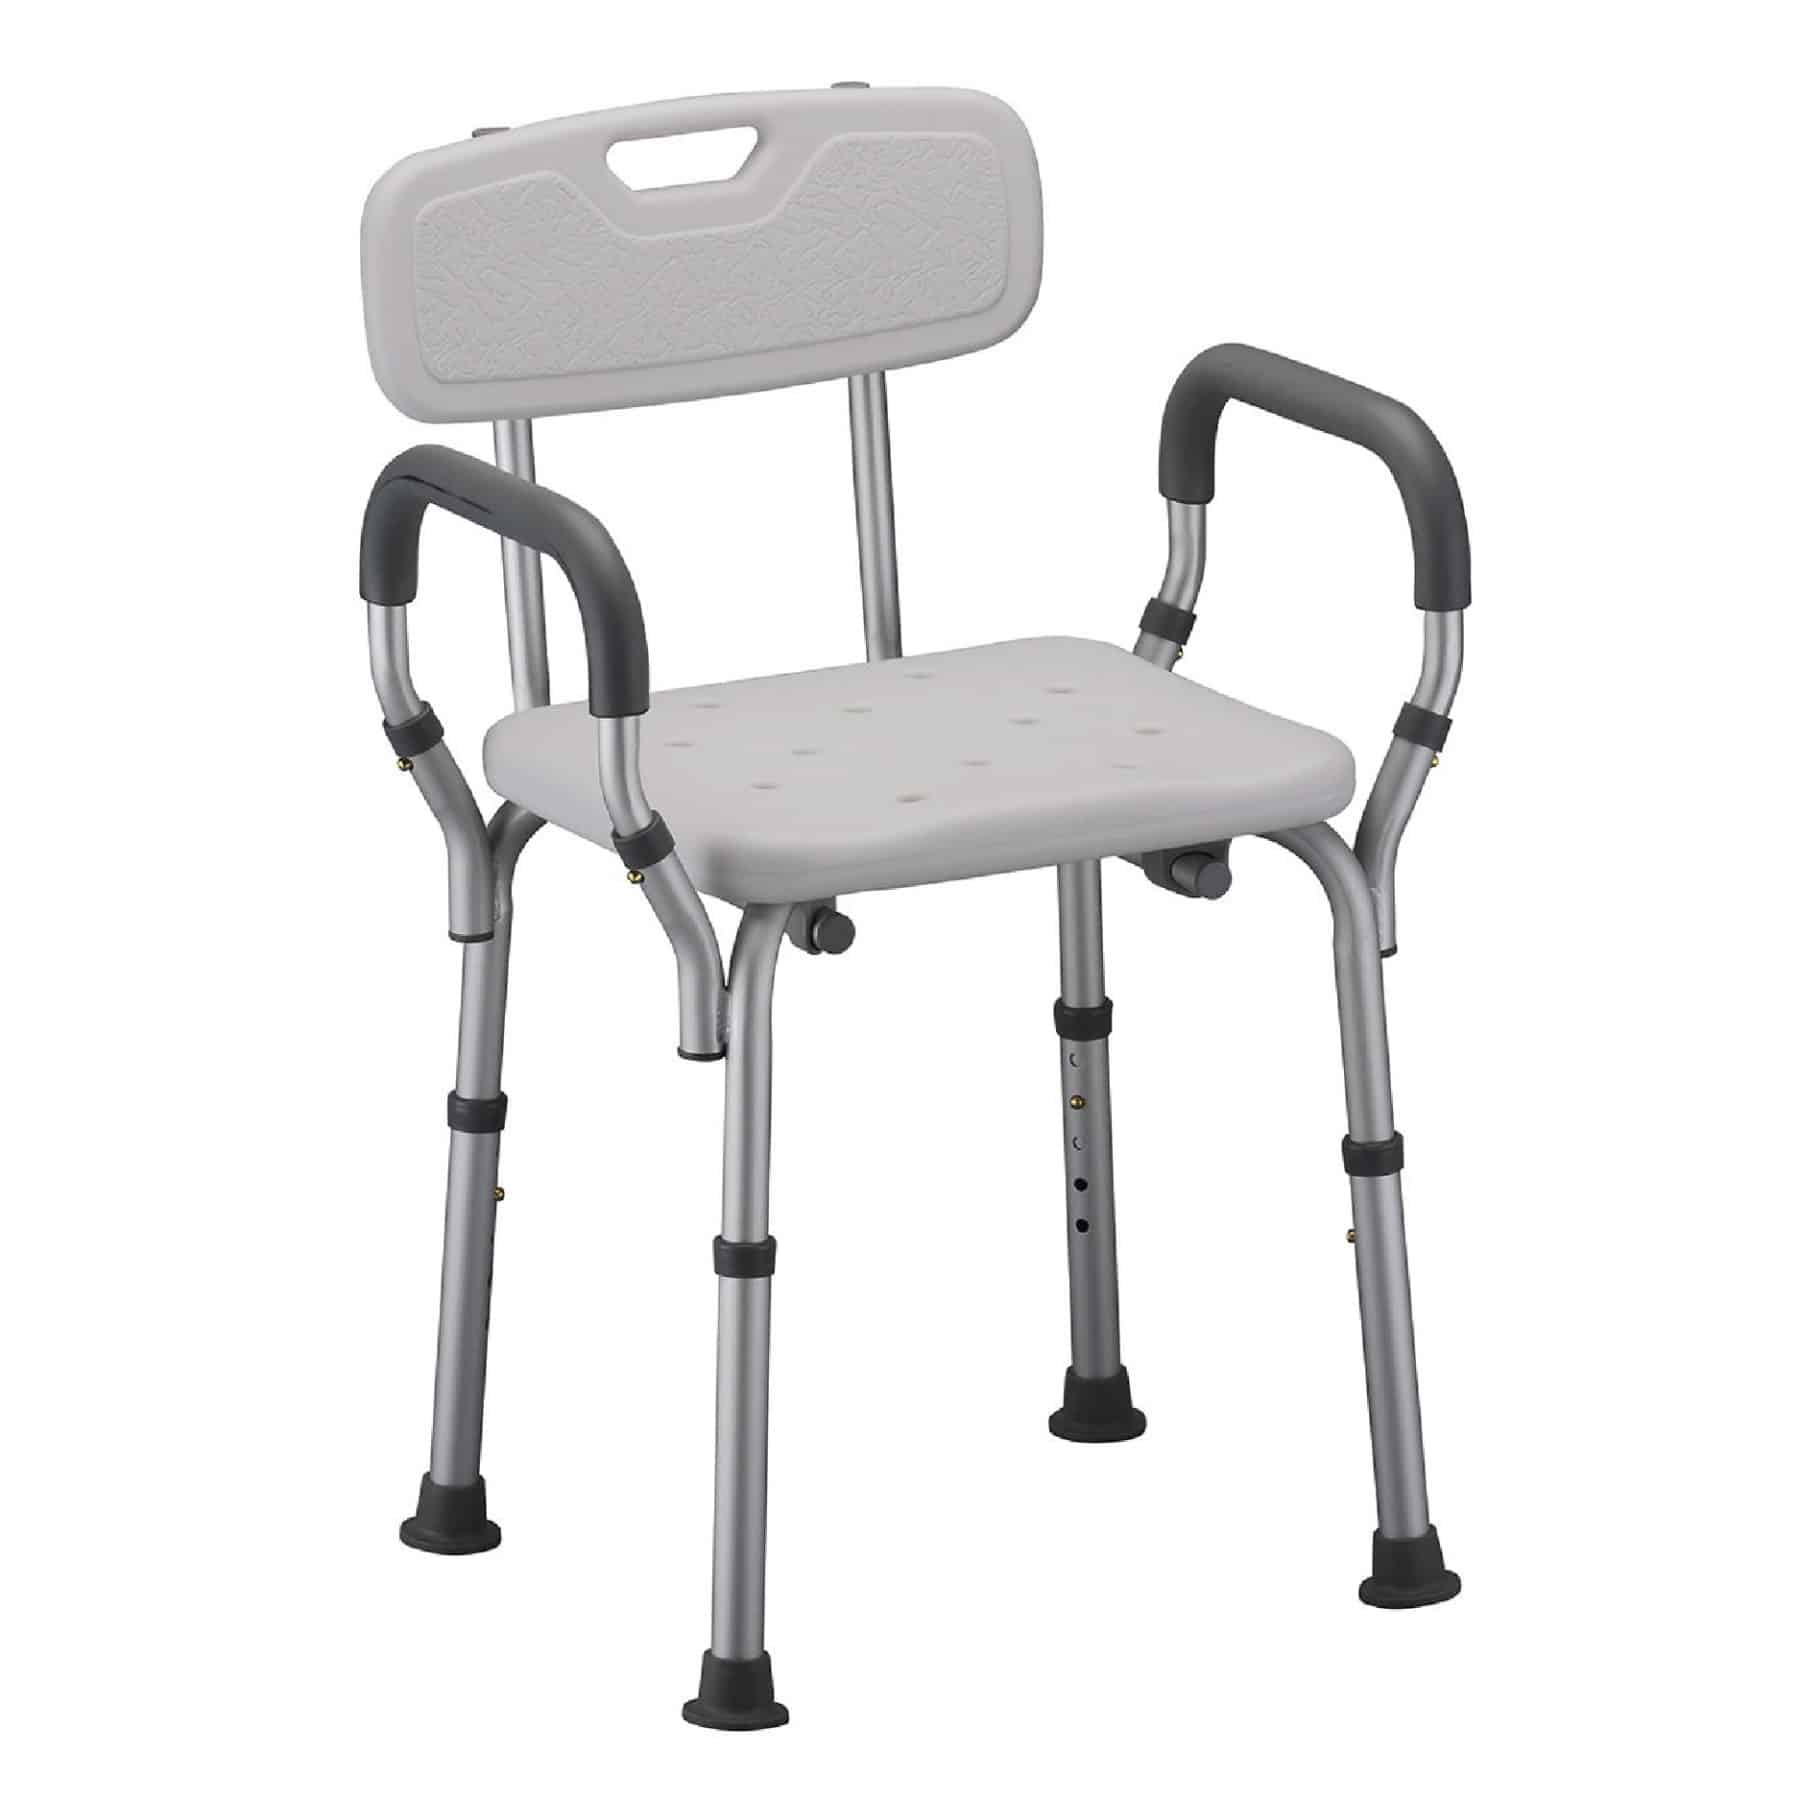 4_BATH SEAT WITH BACK & ARMS-01